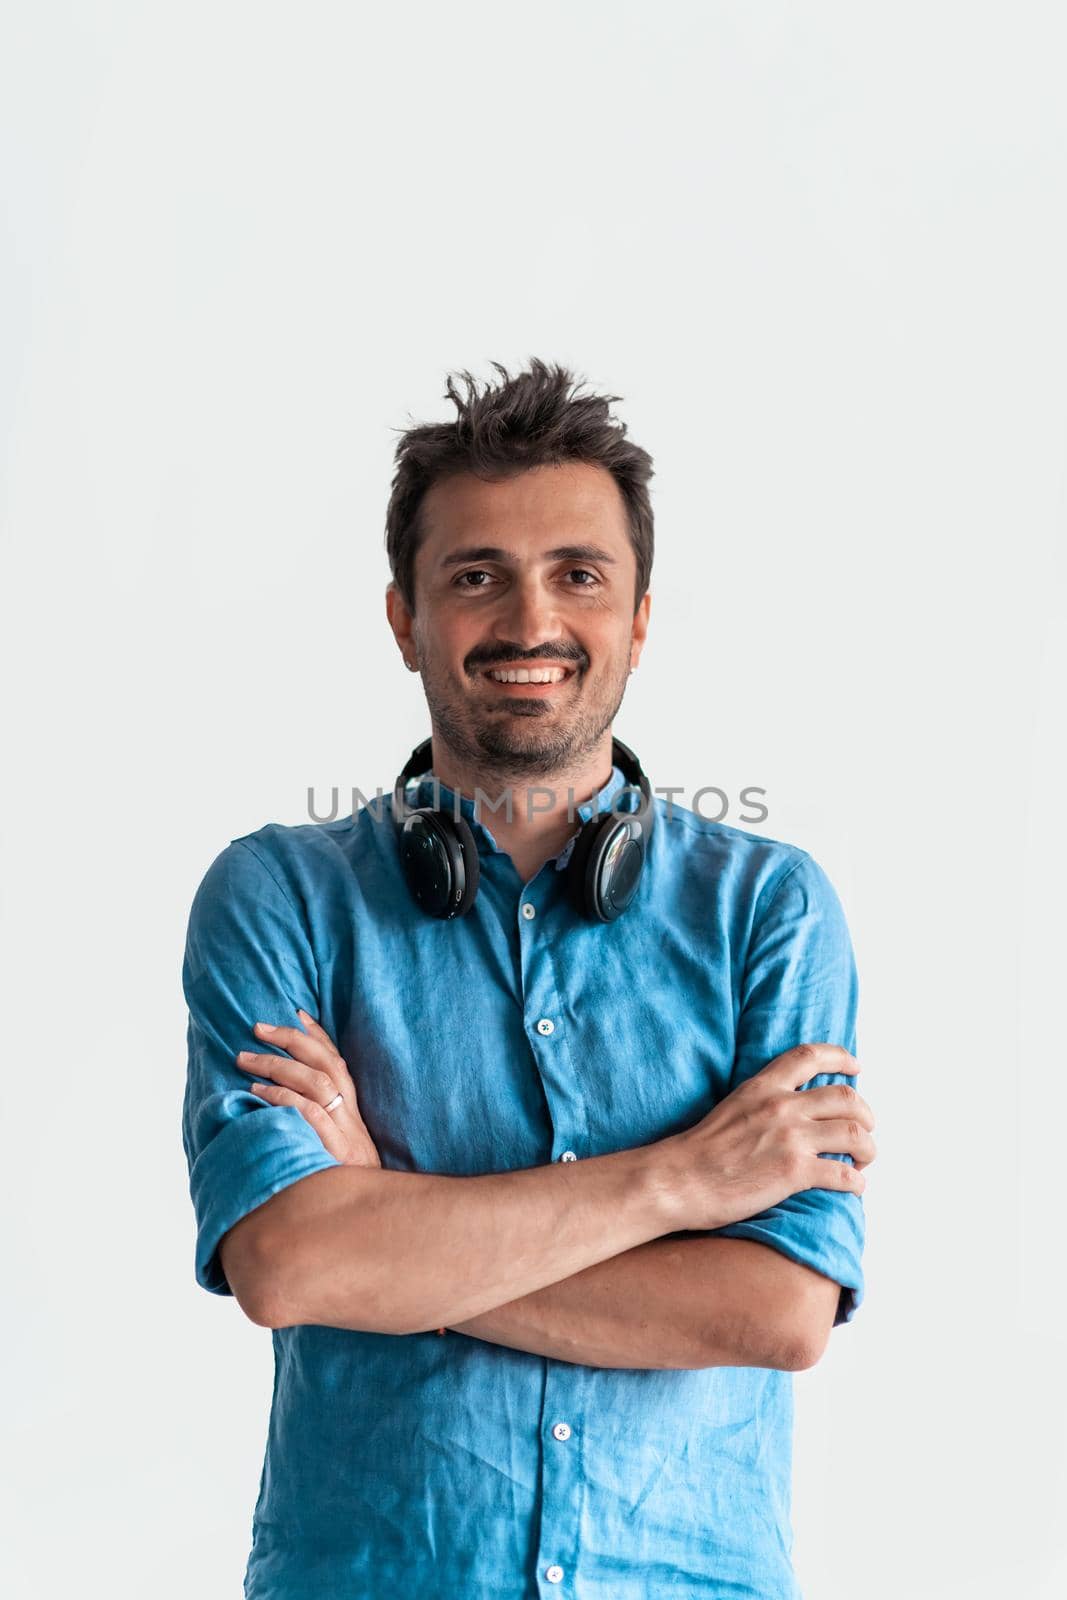 Formal business male portrait. A confident successful casual businessman or manager stands in front of a white background, arms crossed, looking directly at the camera and smiling friendly. High quality photography by dotshock